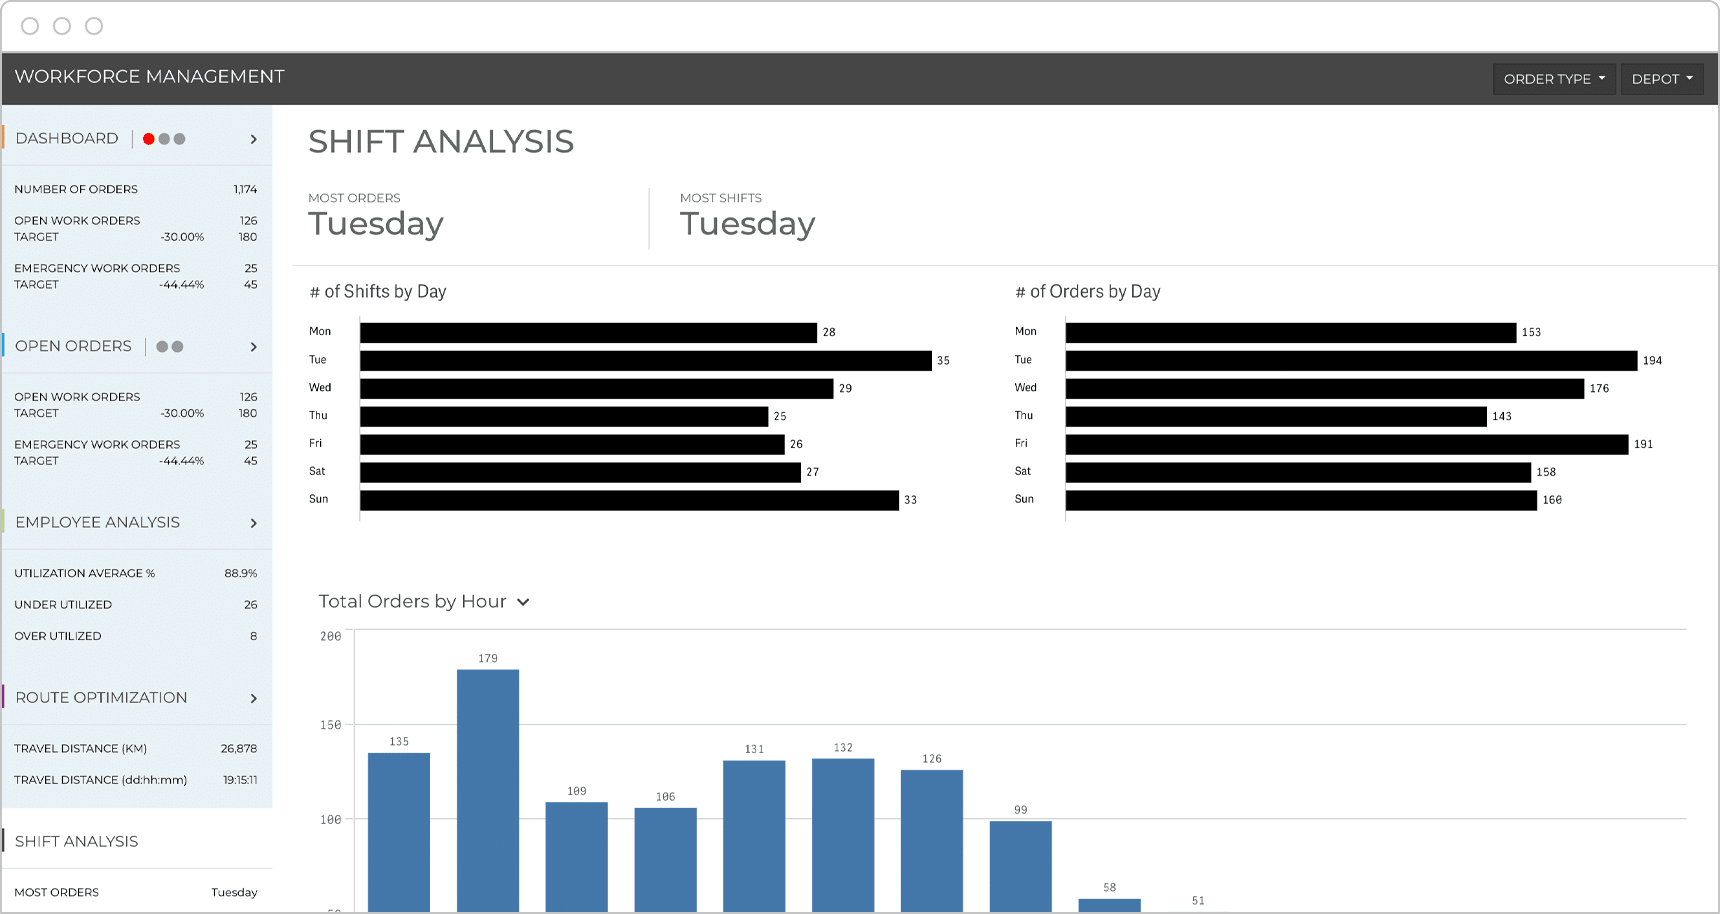 Screenshot of a Shift Analysis dashboard showing data for shifts and orders by day of the week